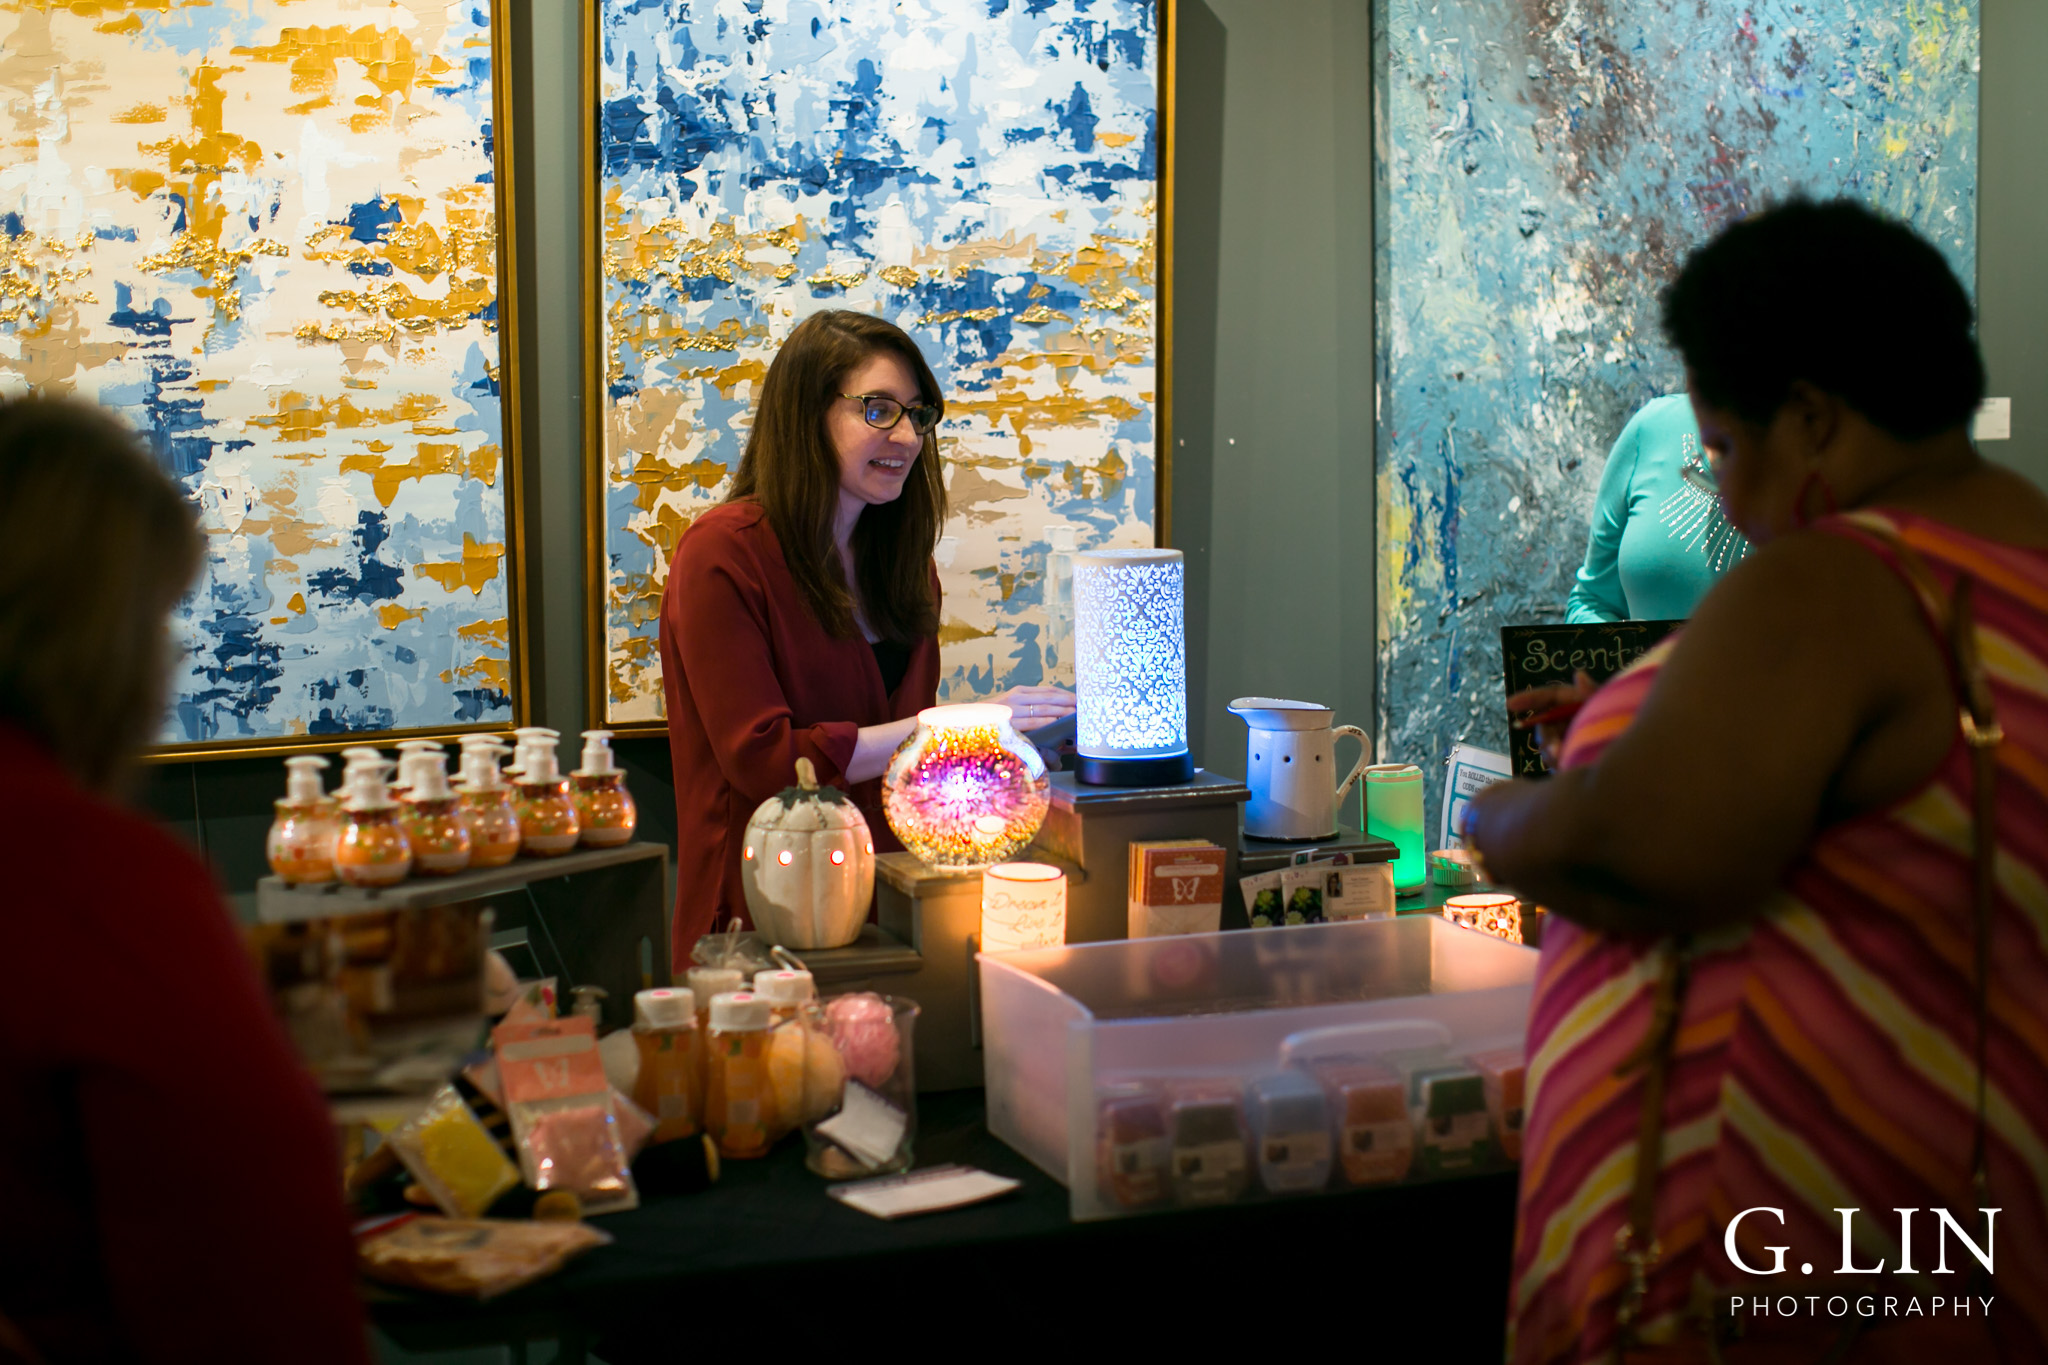 Raleigh Event Photographer | G. Lin Photography | Vendor greeting customer at booth